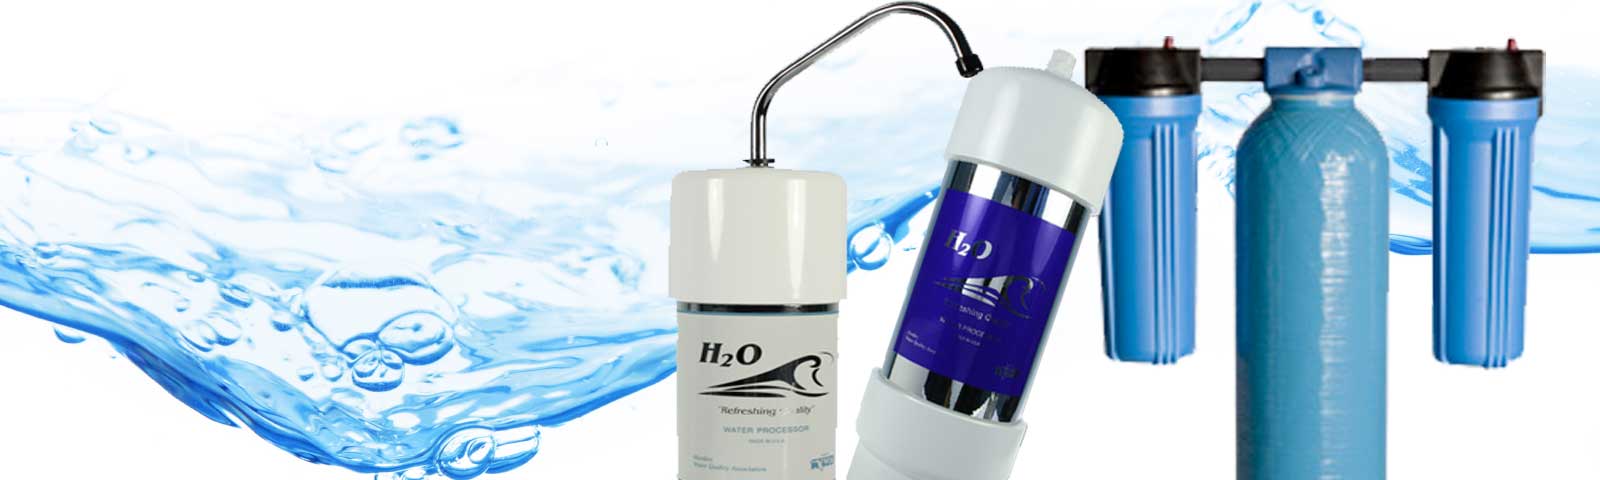 WATER FILTER REPLACEMENT SUPPLIER